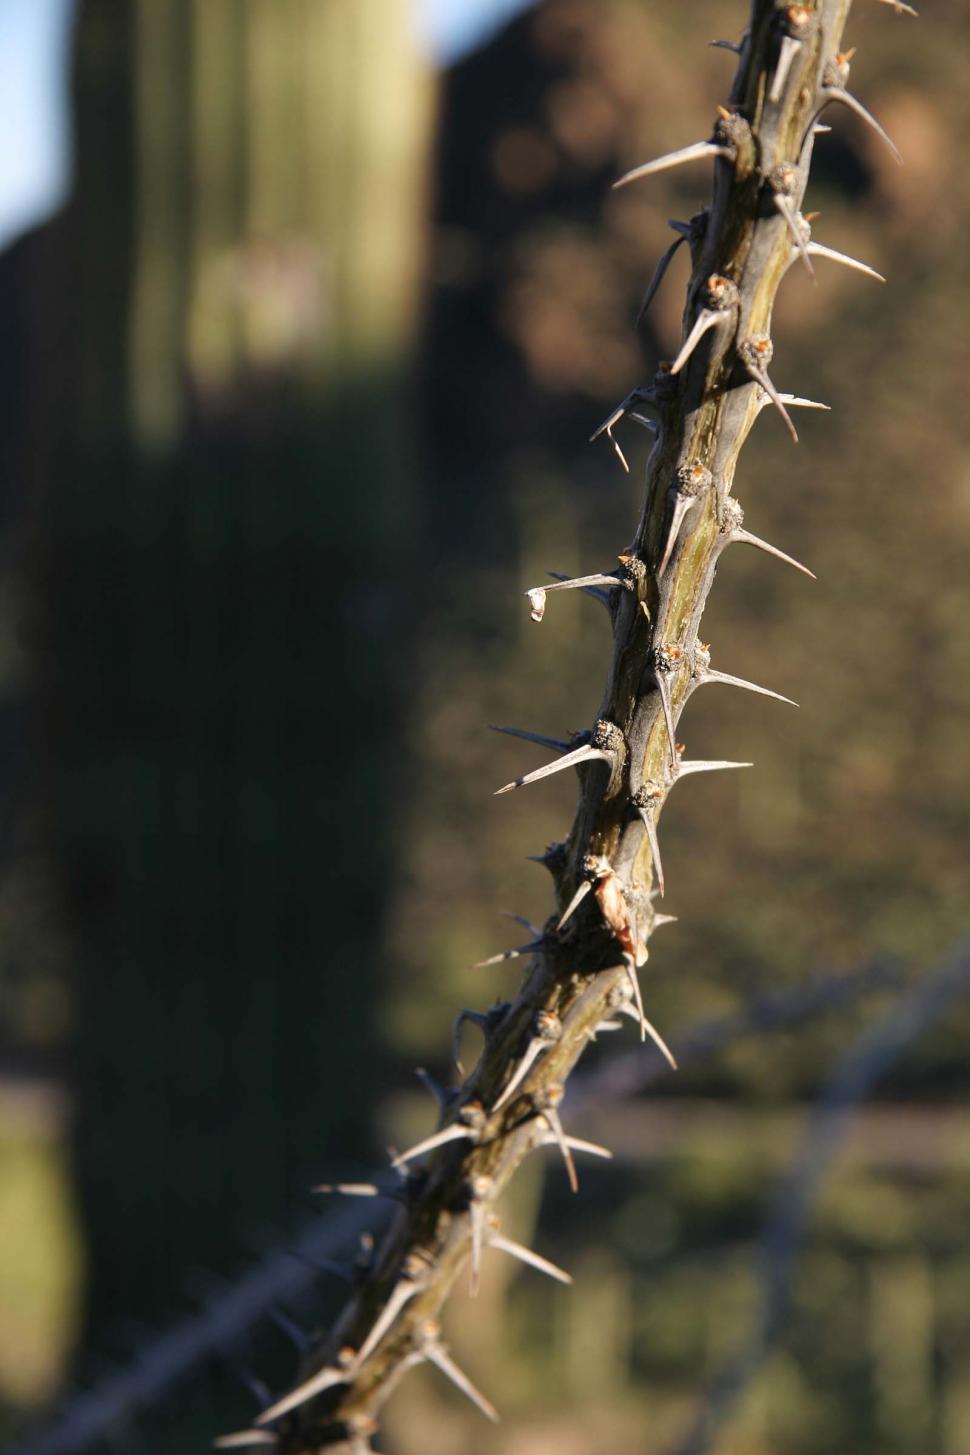 Free Image of sonoran desert tucson cactus needles spines thorns spikes pads ocotillo 